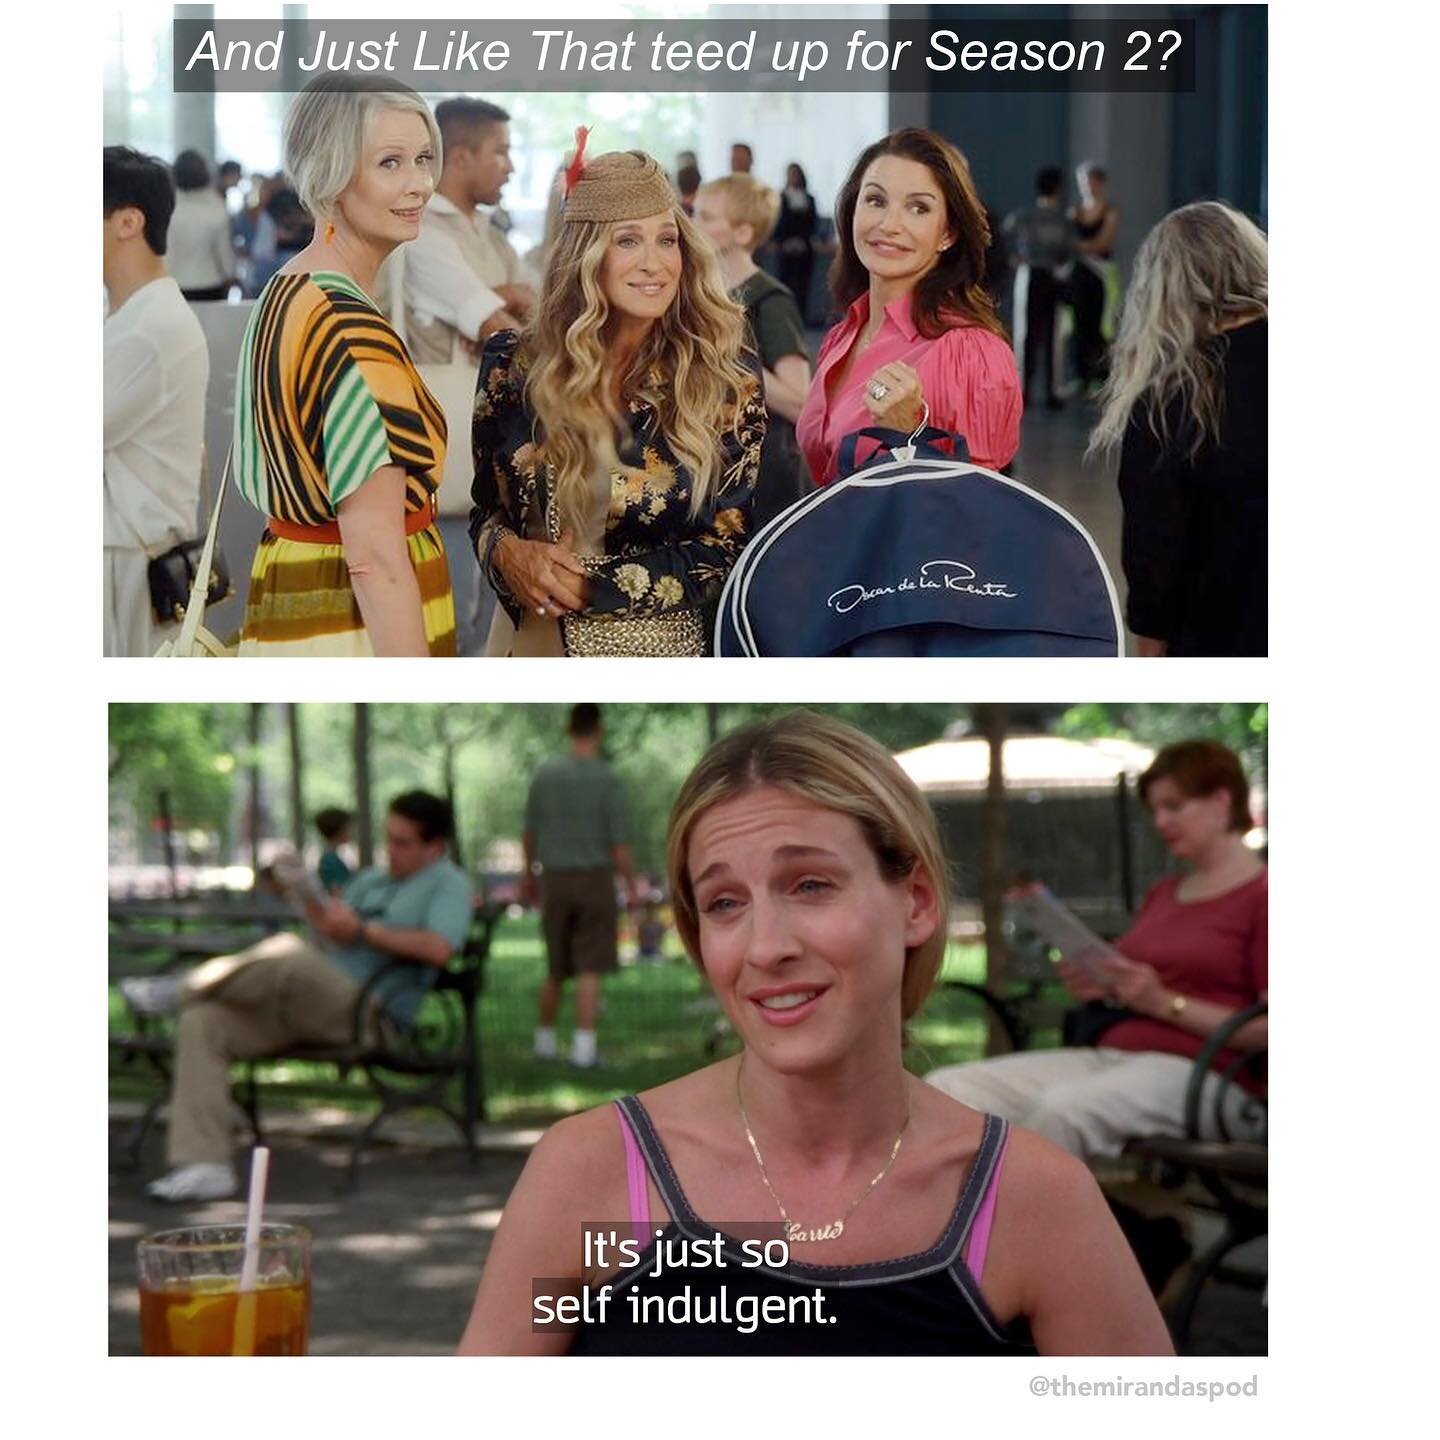 Just let us know when Samantha&rsquo;s back. 

#themirandaspod #ajltmemes #satcmemes #satc #sexandthecityquotes #andjustlikethat #hbomax #carriebradshawquotes